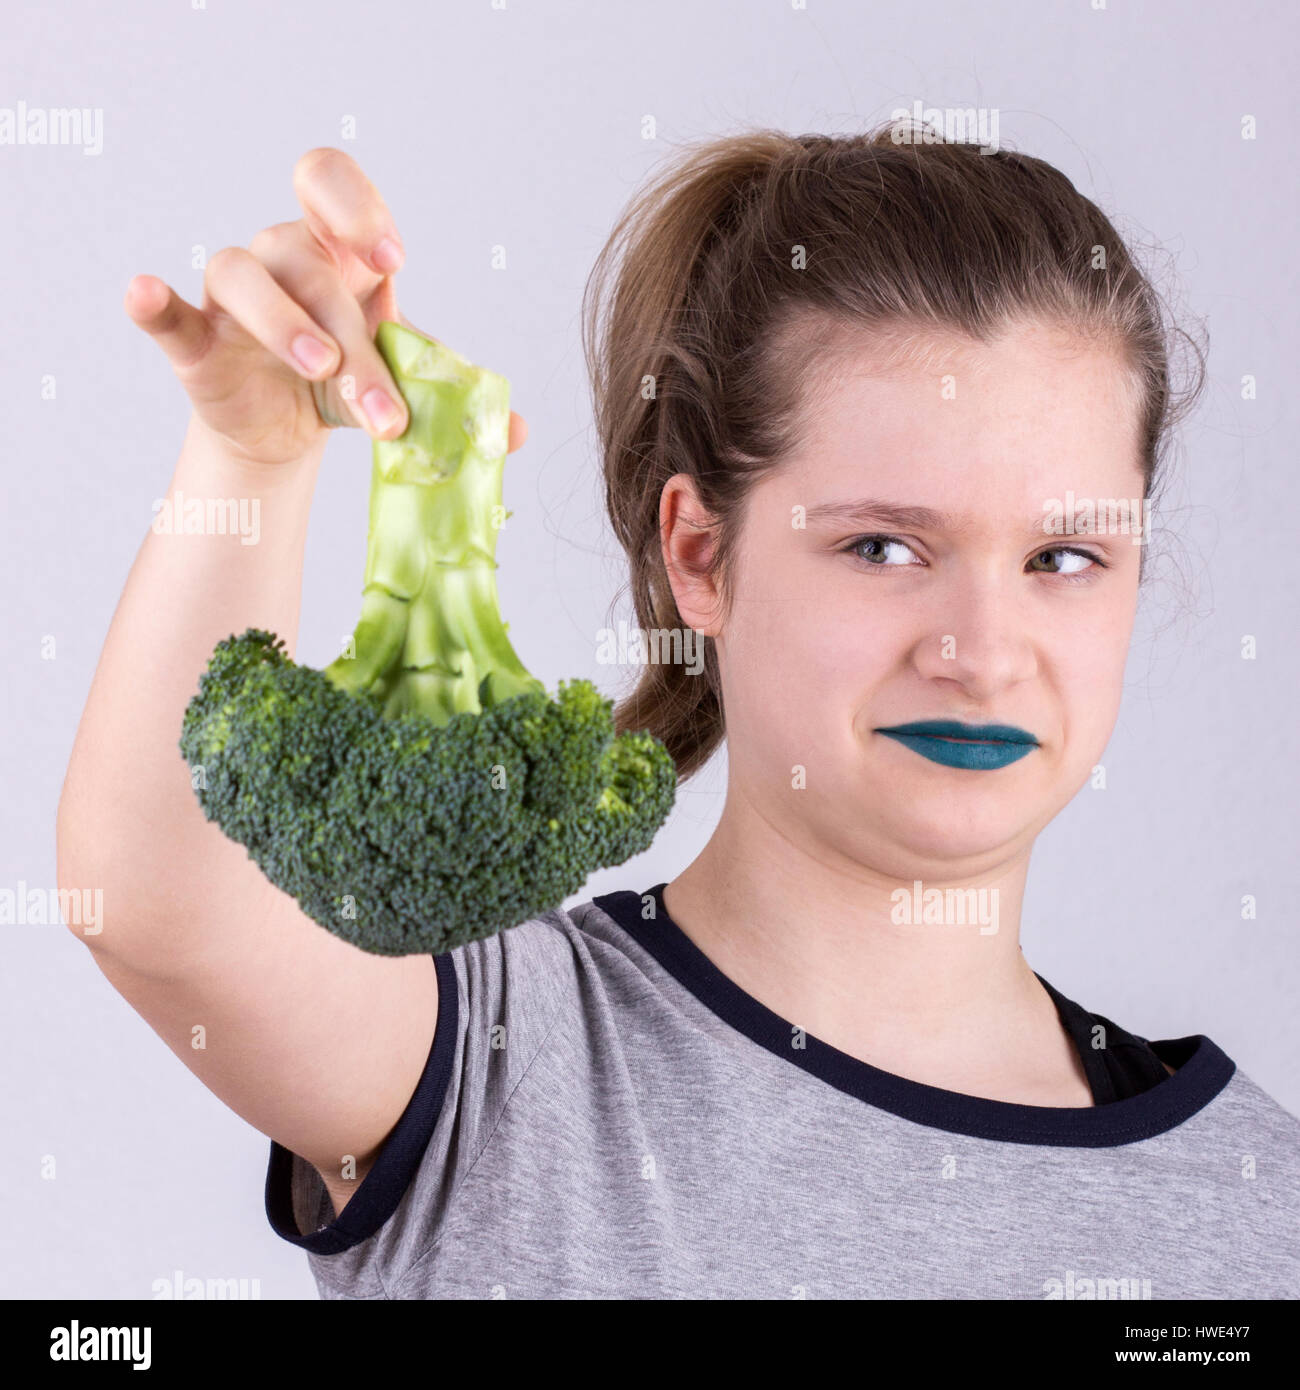 A pretty girl skeptically holds a broccoli in her hand Stock Photo